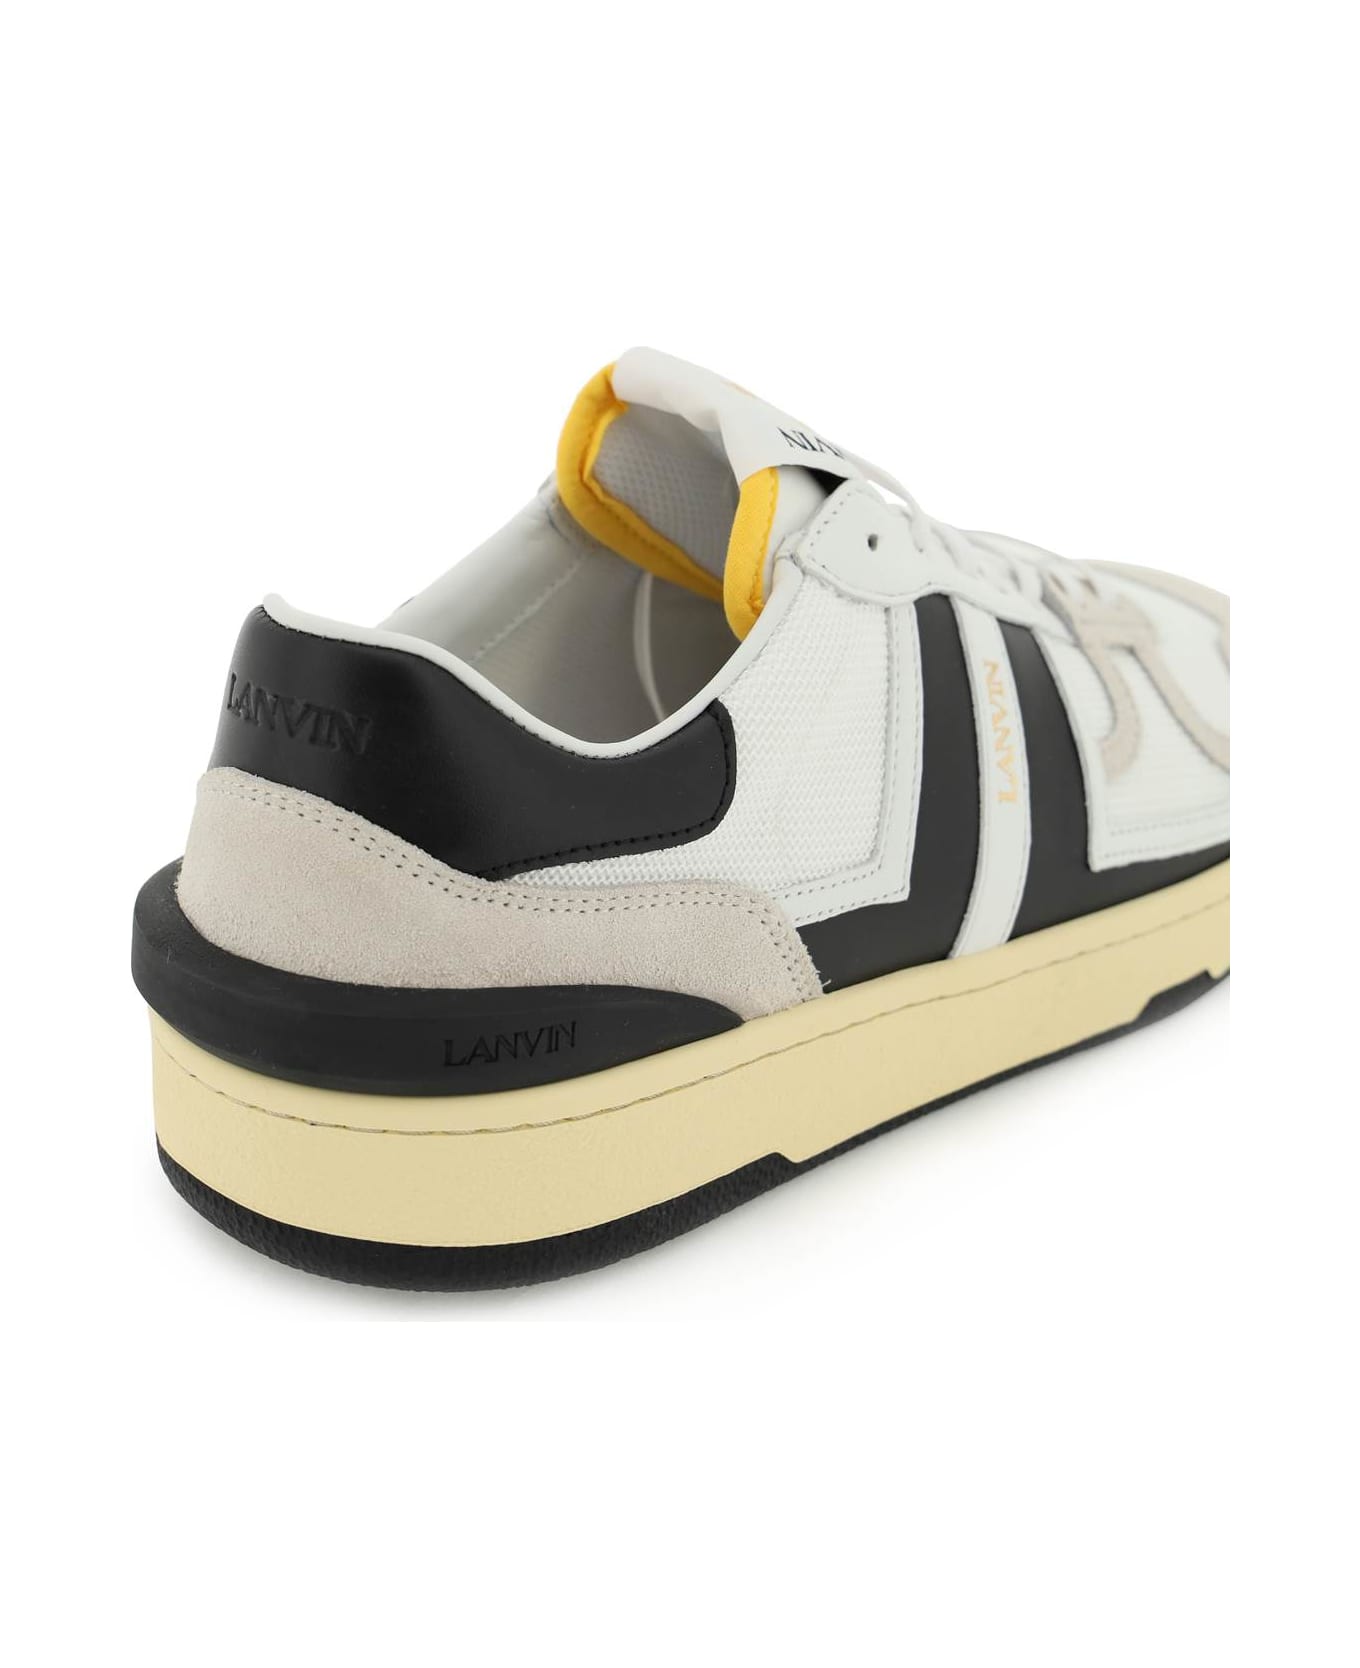 Lanvin Clay Sneakers - White スニーカー